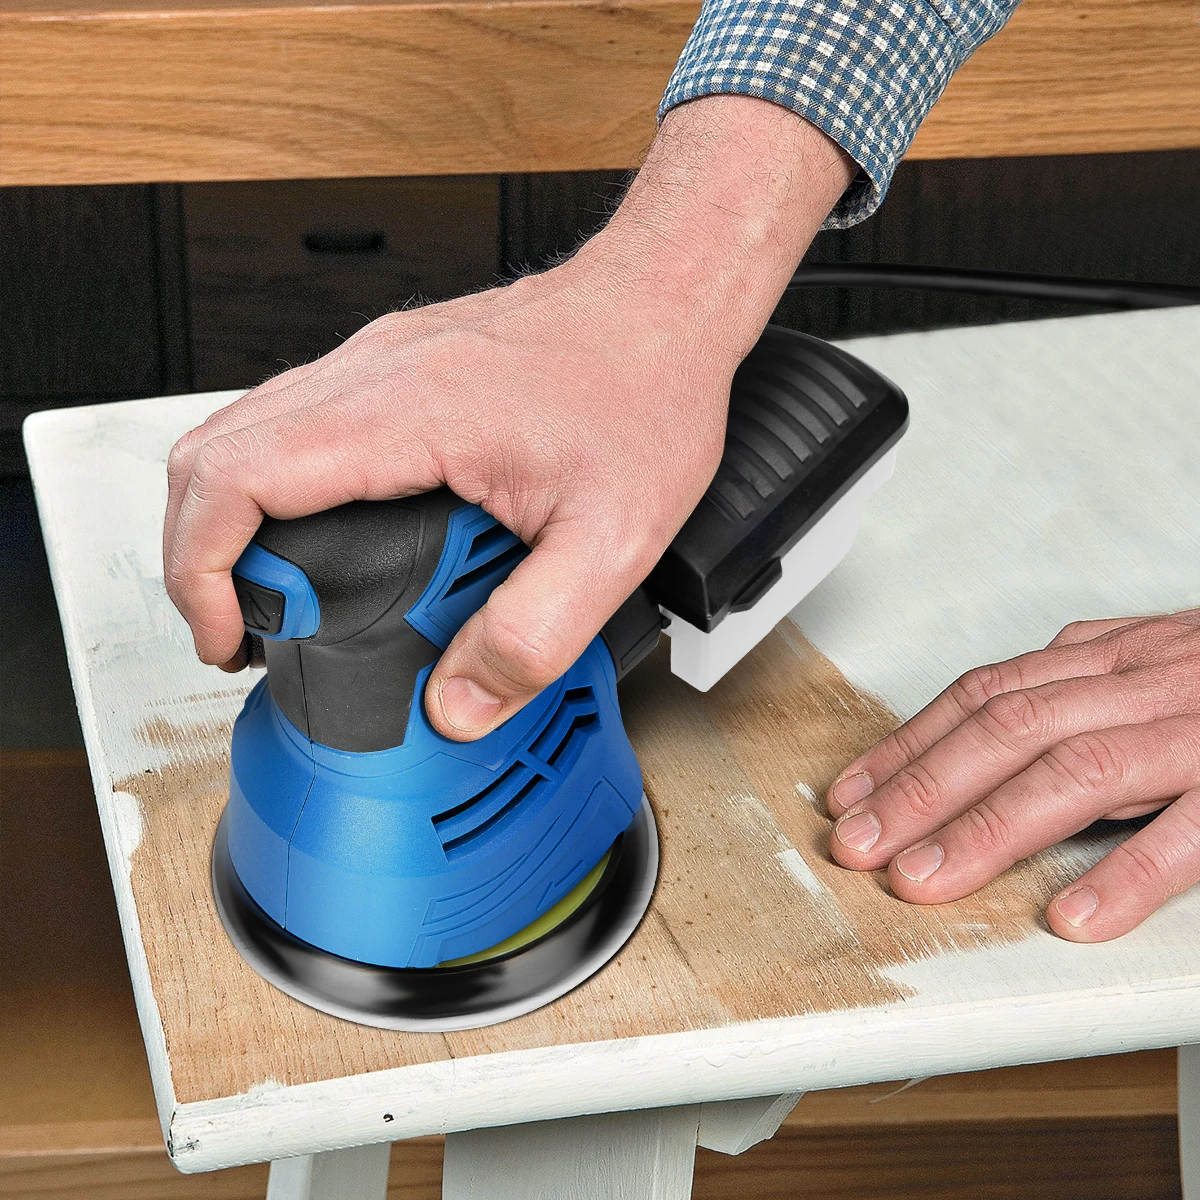 orbital sander while in use over the wood